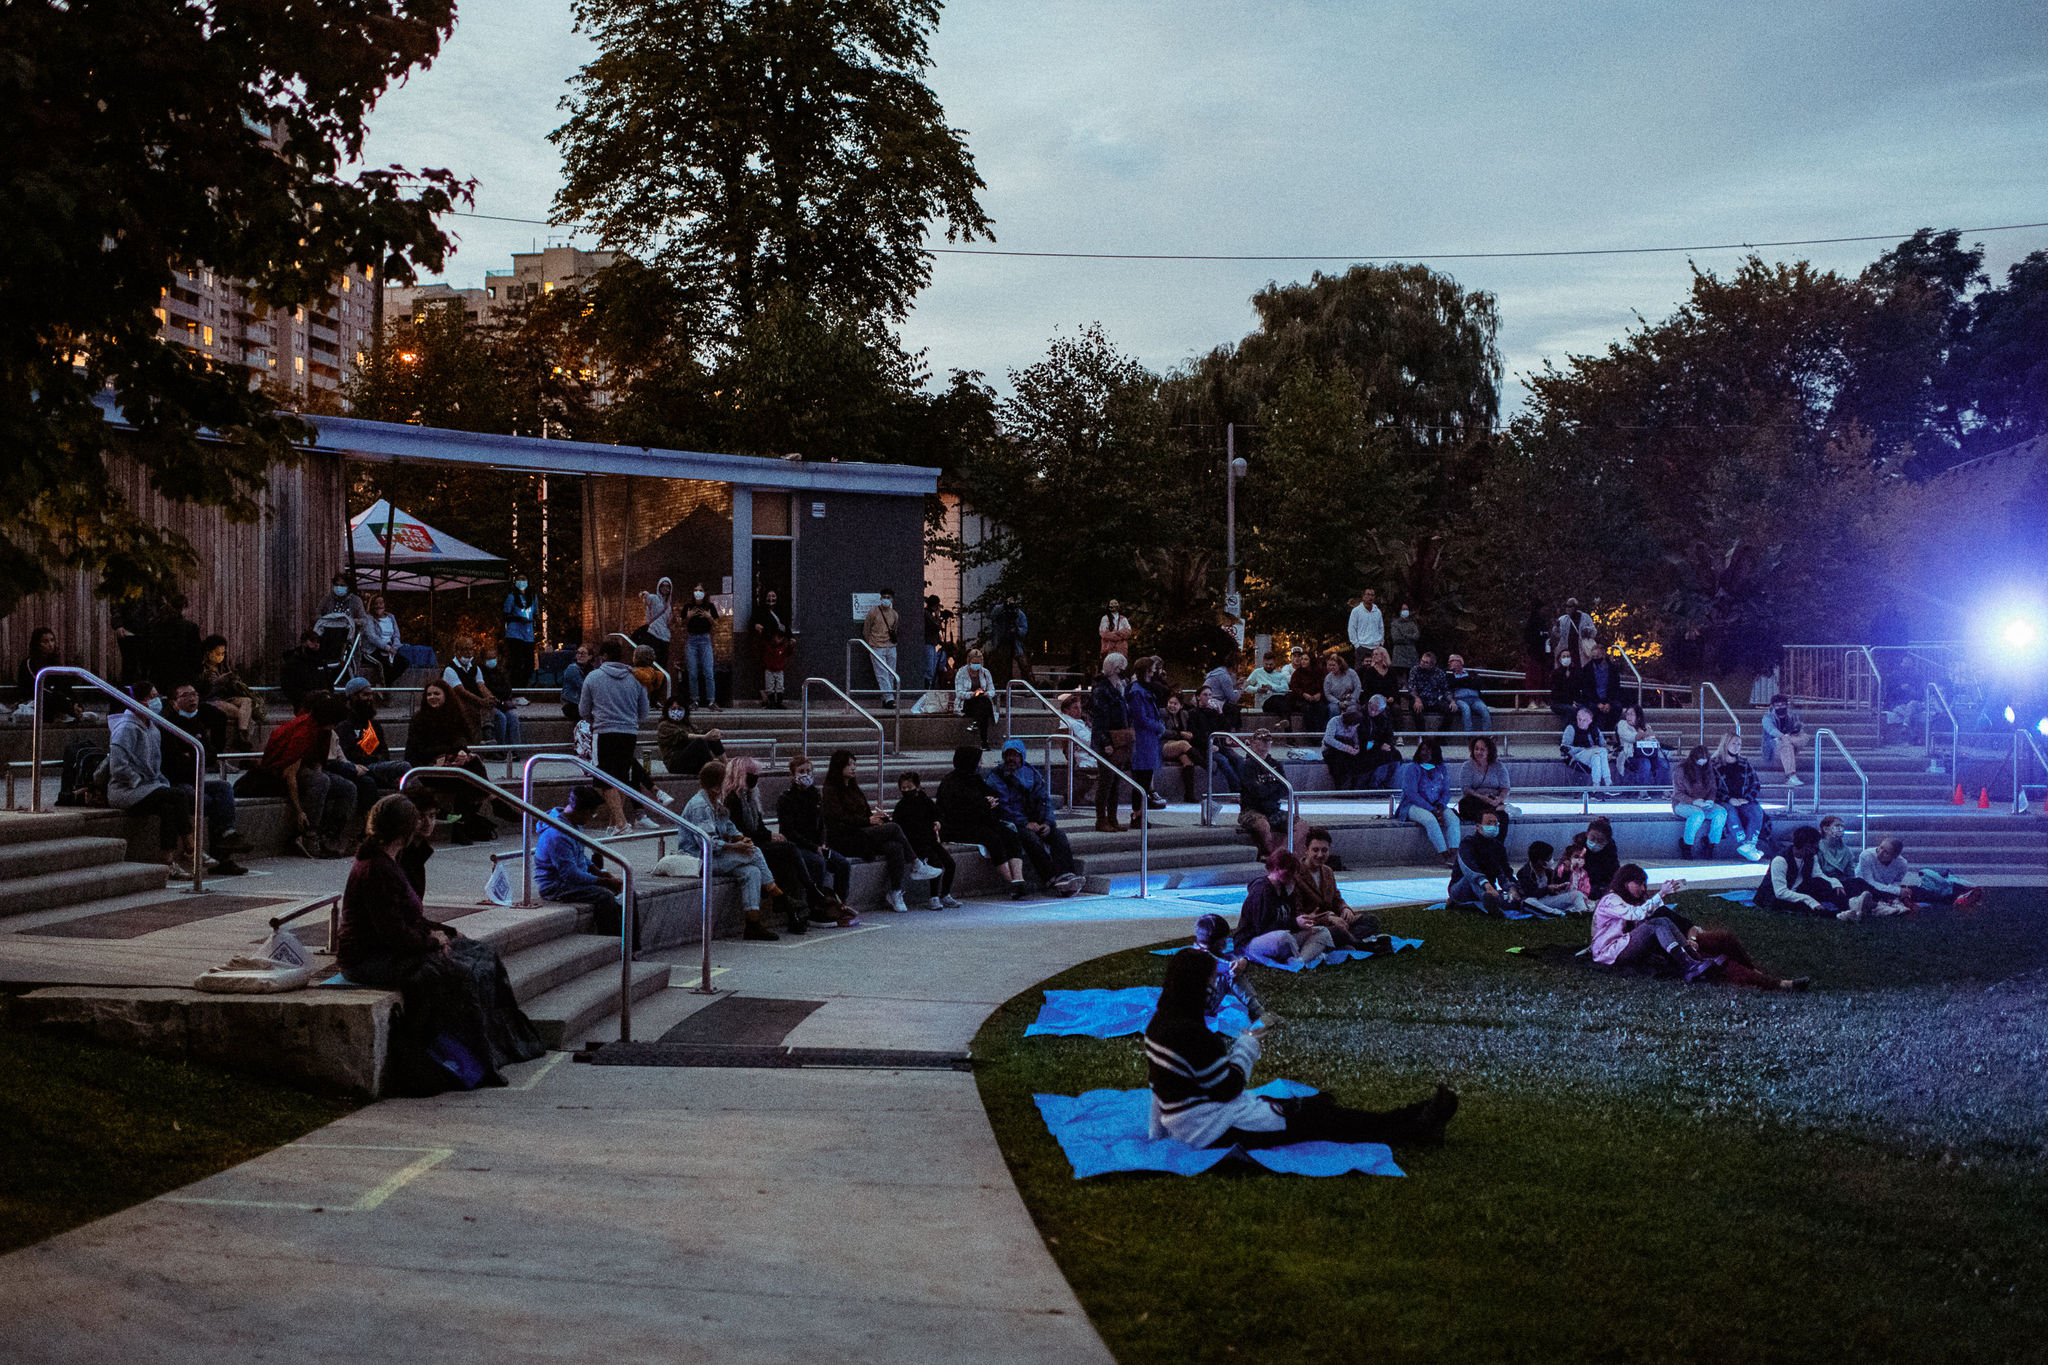 Audience members sit on concrete tiered seating in front of lights as they wait for a performance to beghin.